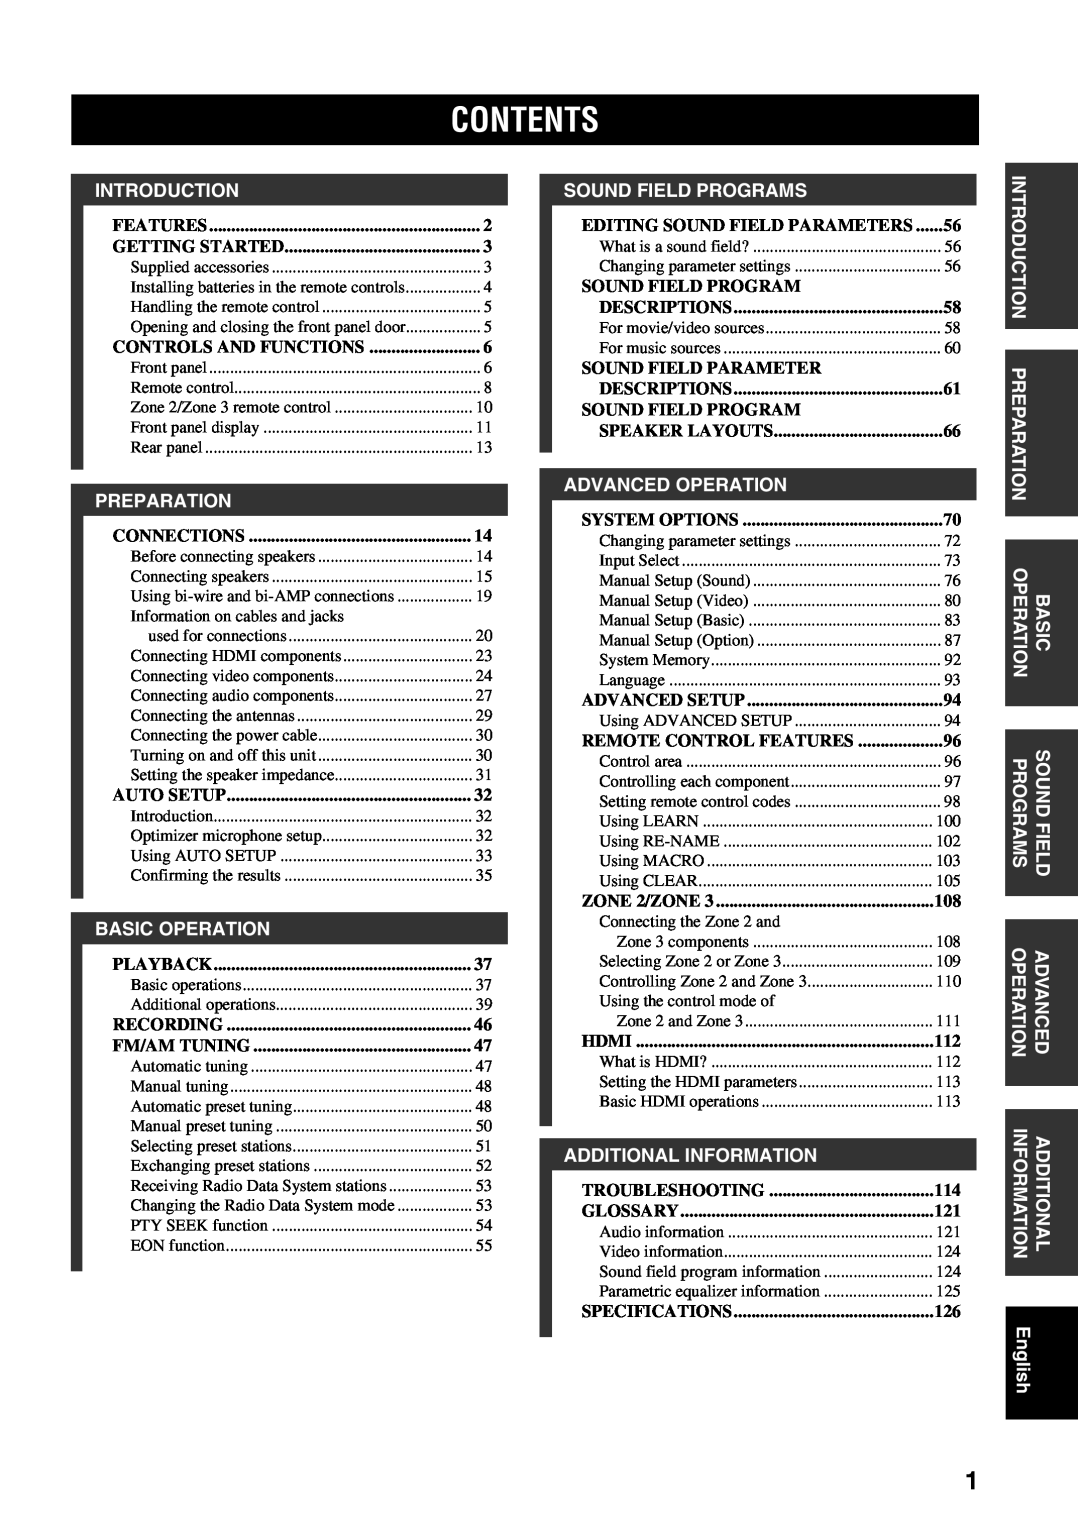 Yamaha RX-V2600 owner manual Contents, Controls And Functions, Connections, Auto Setup, Playback, Recording, Fm/Am Tuning 